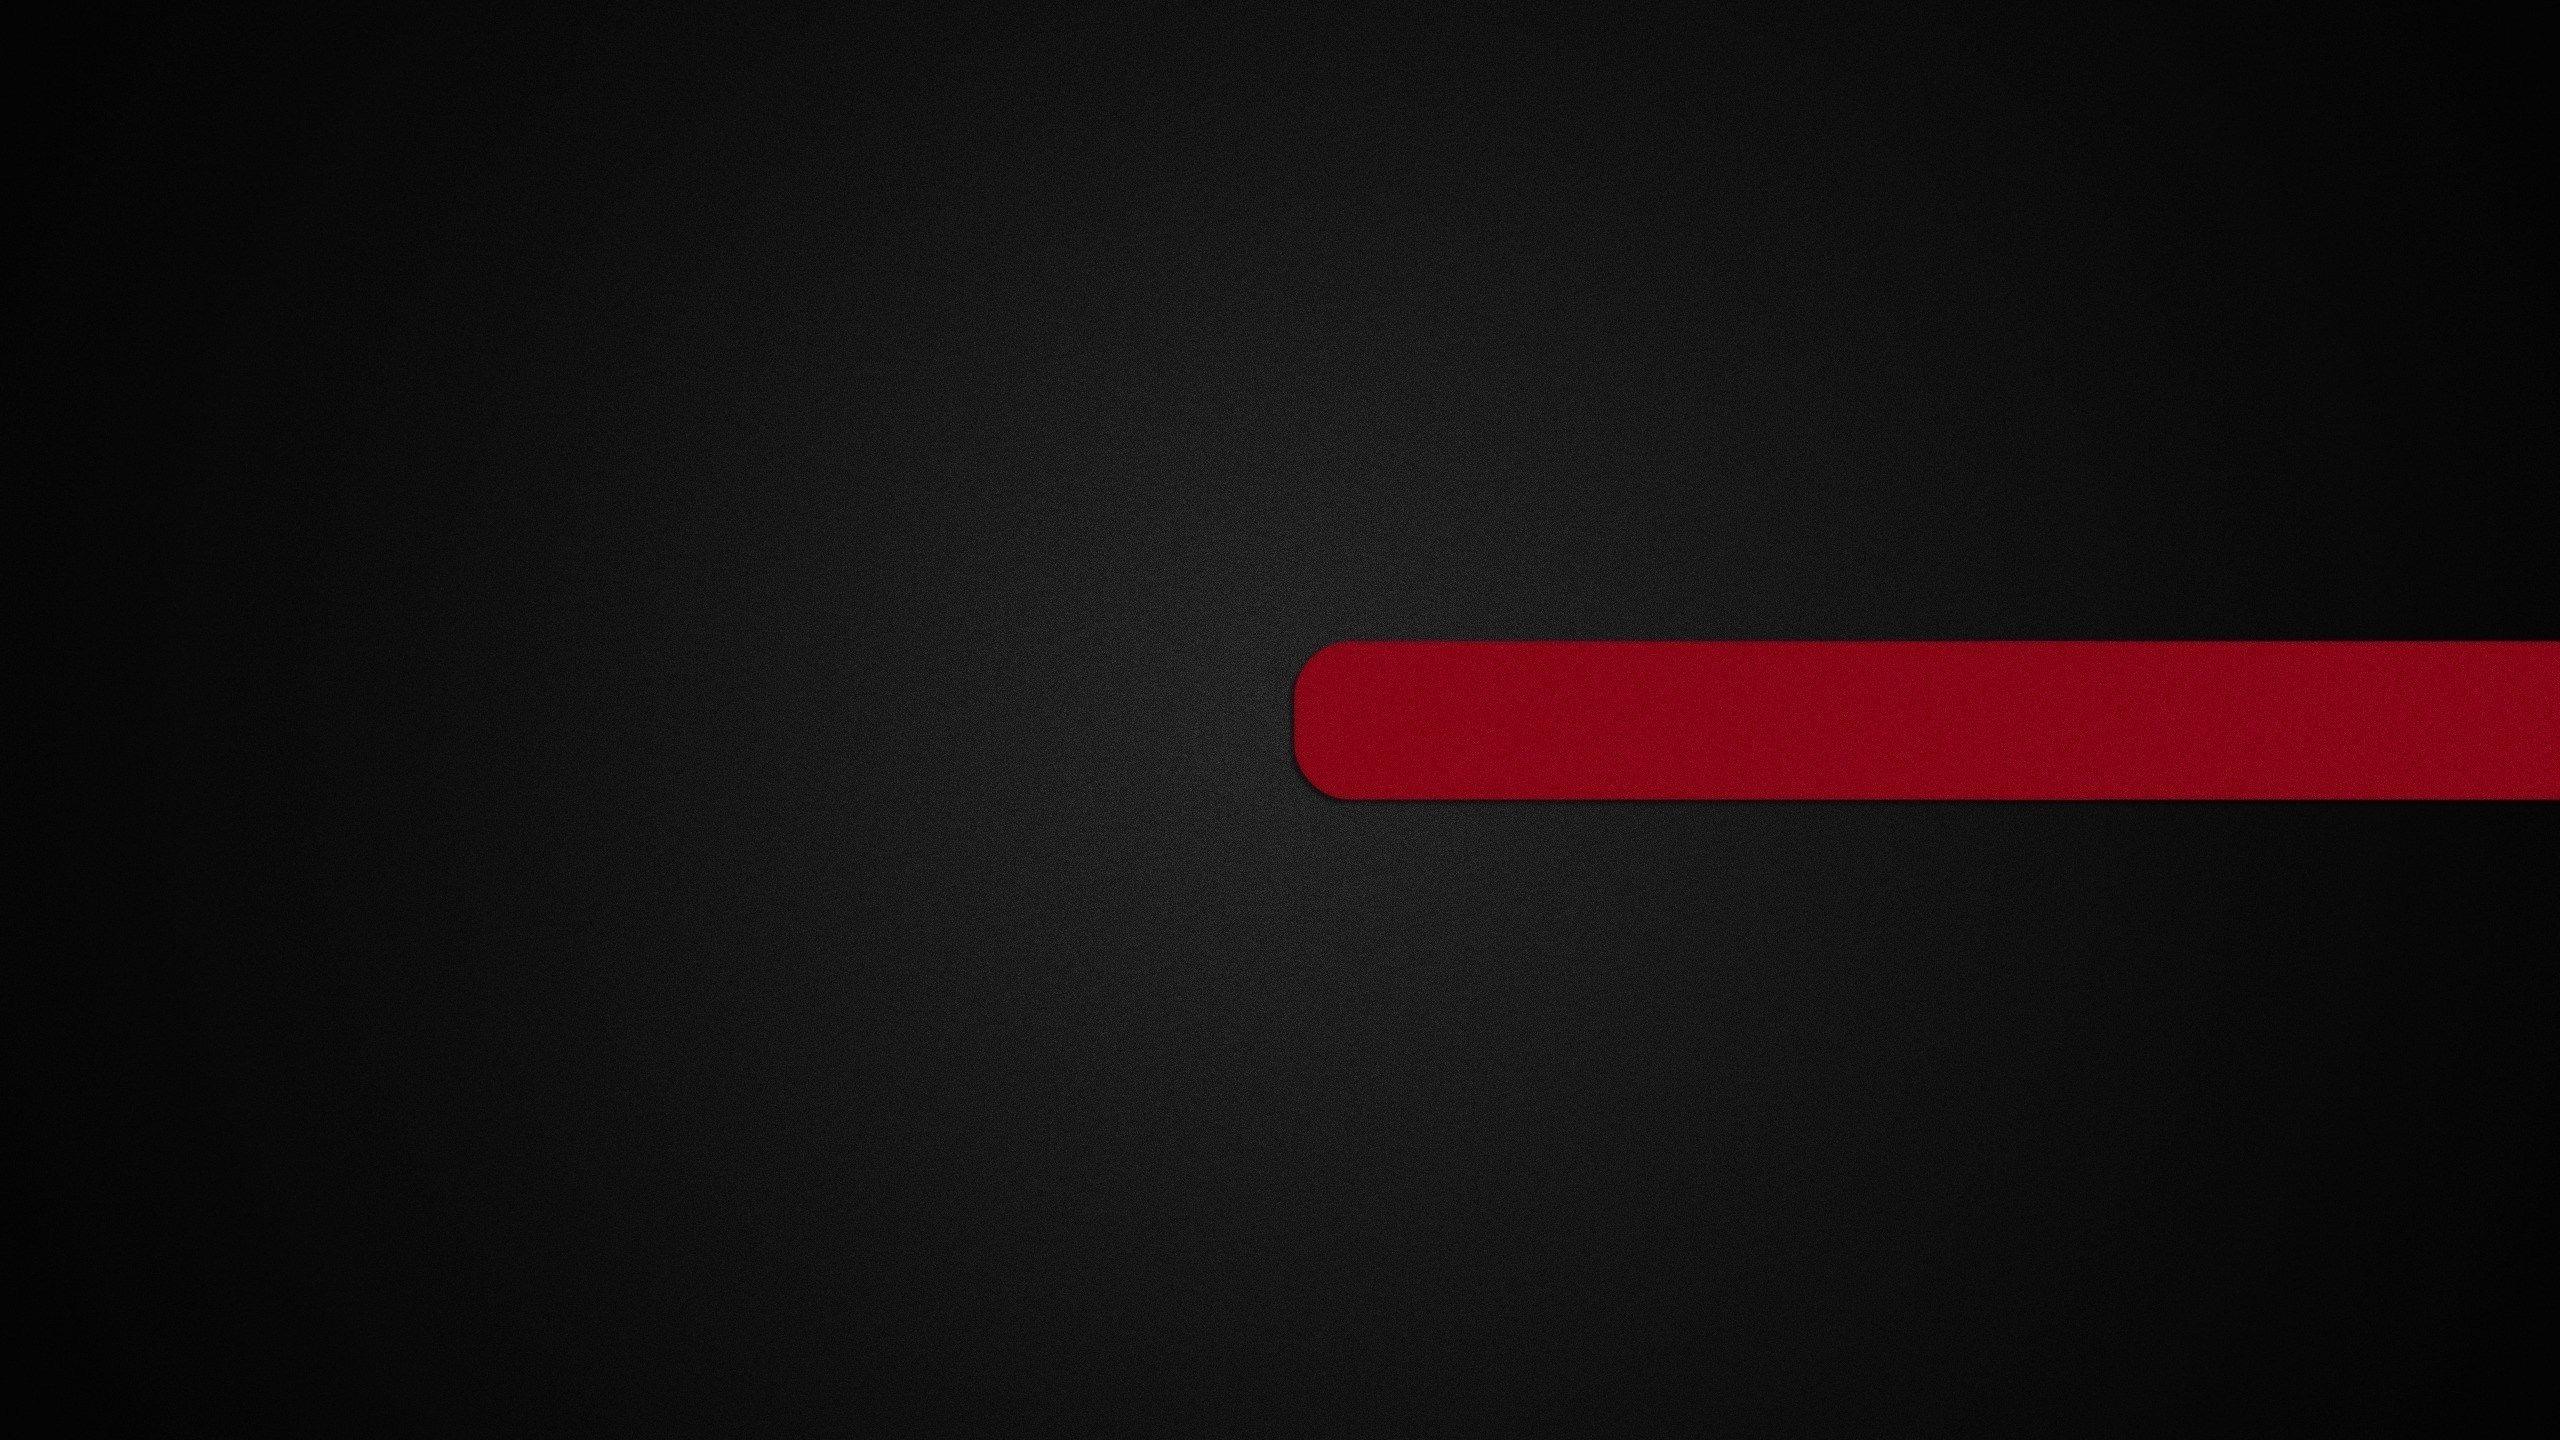 hd black and red iphone wallpaper